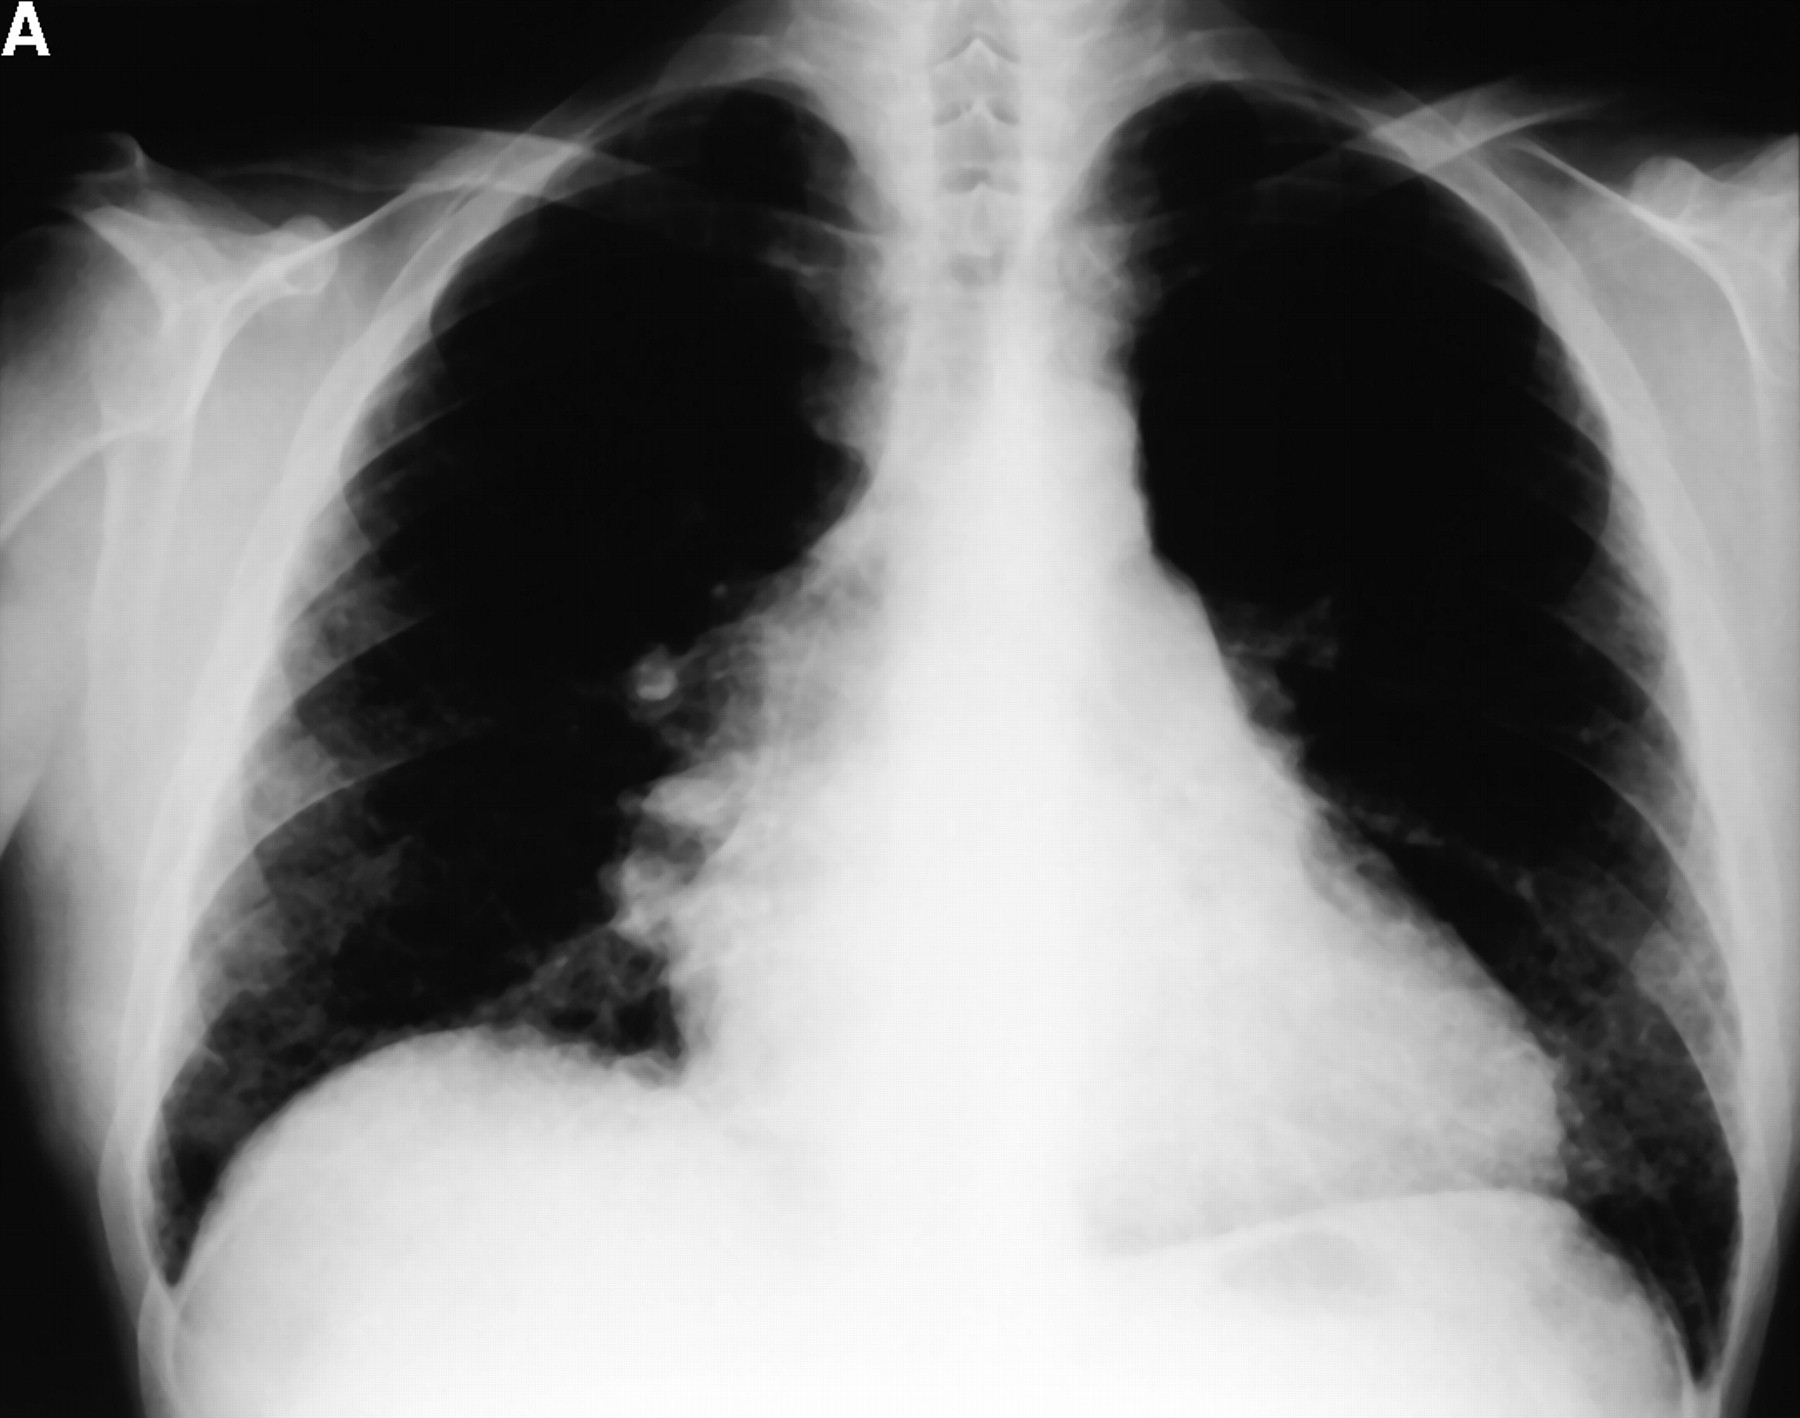 Chest x-ray for a patient with advanced Histiocytosis X associated with severe pulmonary hypertension